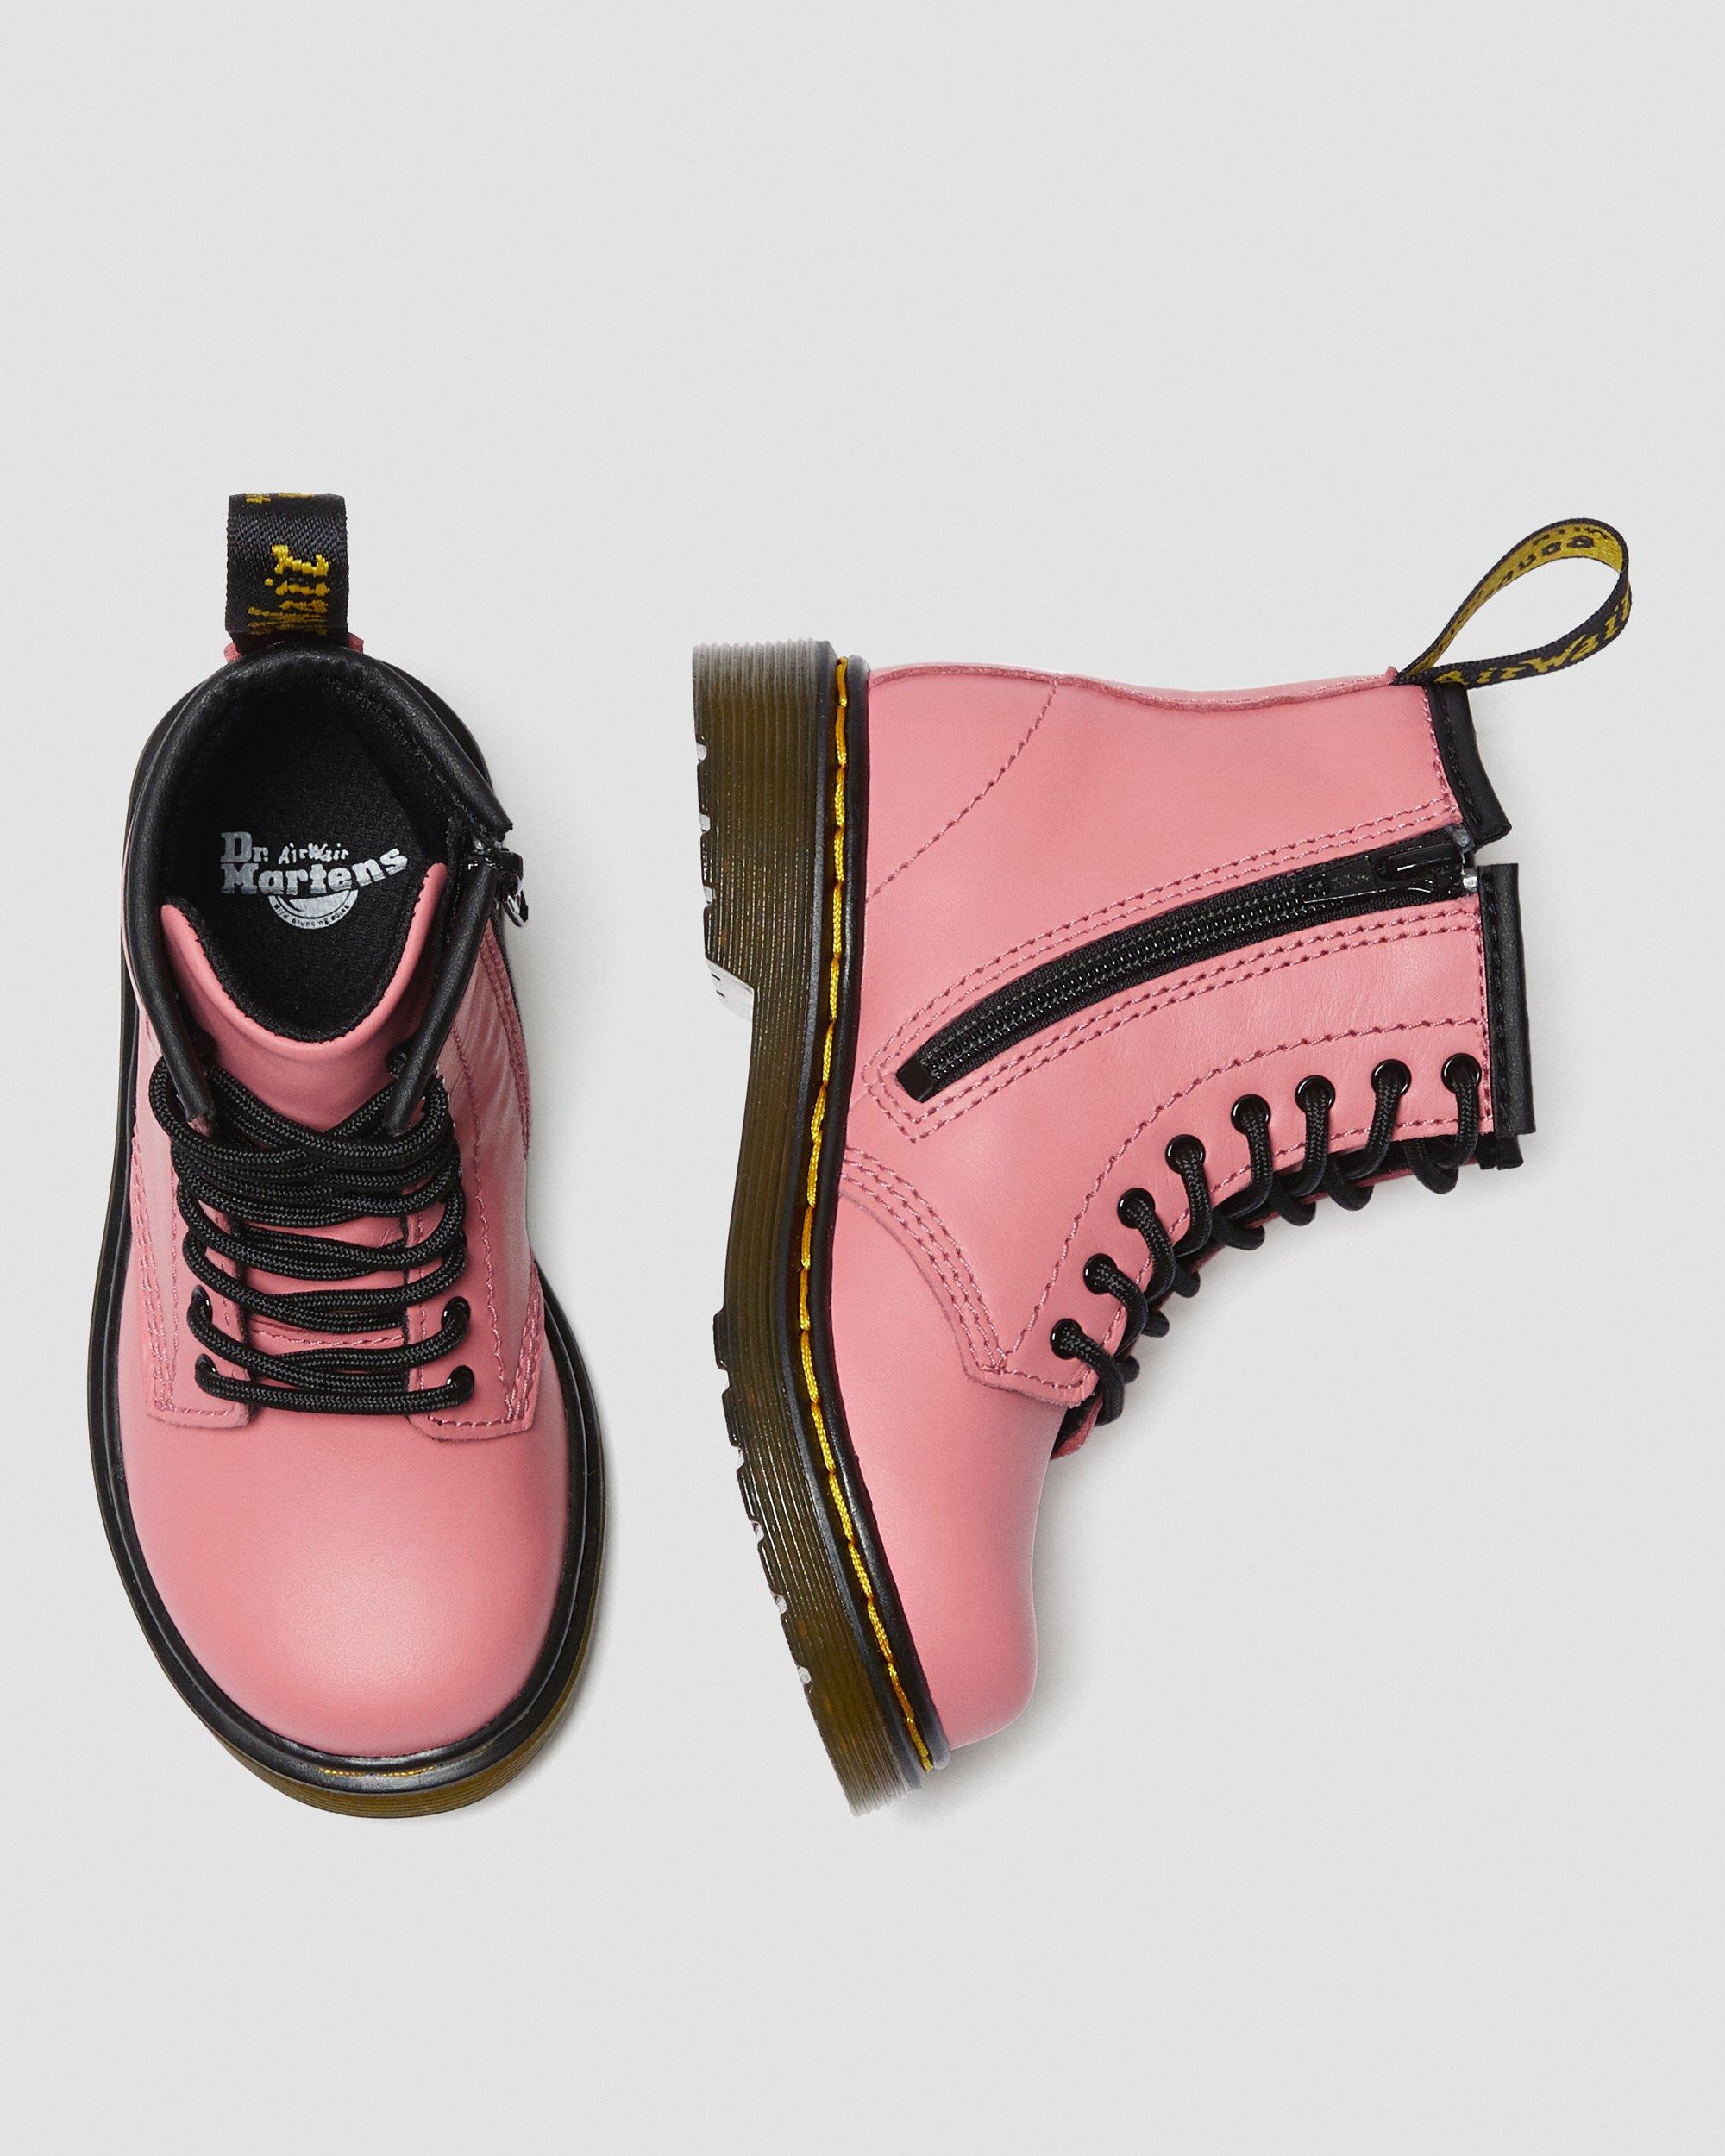 Toddler 1460 Muted Leather Lace Up Boots in Acid Pink | Dr. Martens